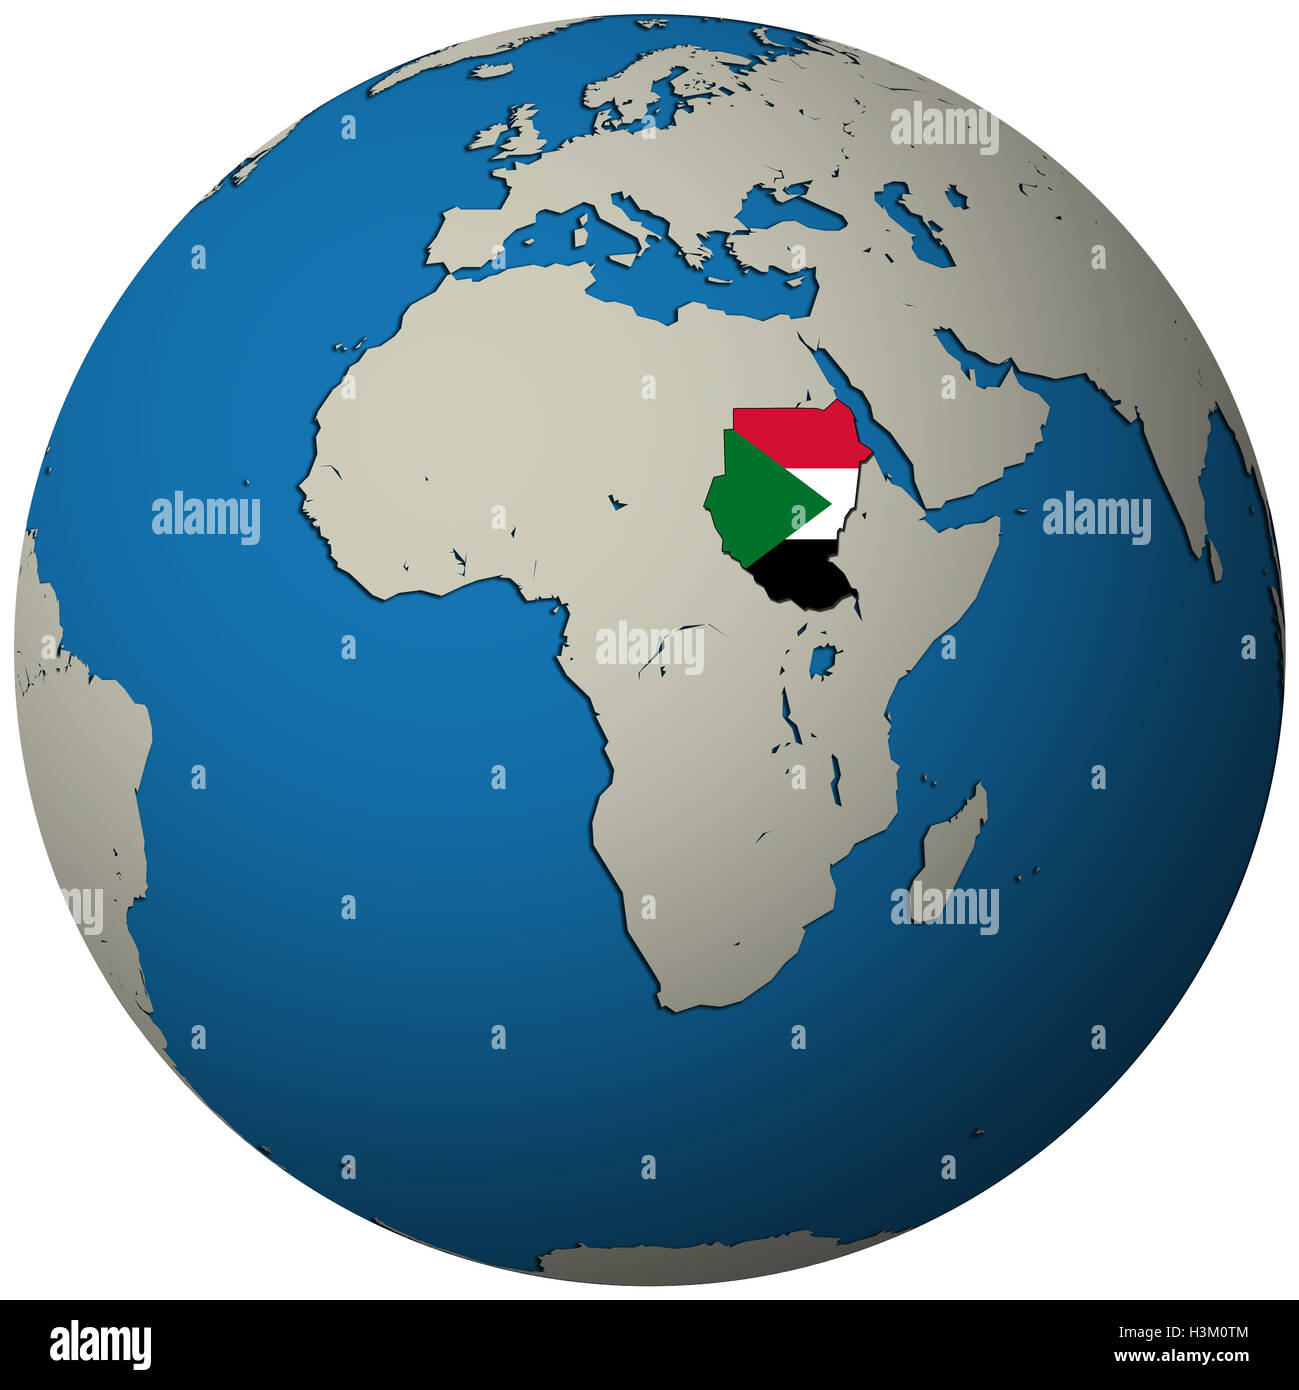 sudan territory with flag on map of globe Stock Photo